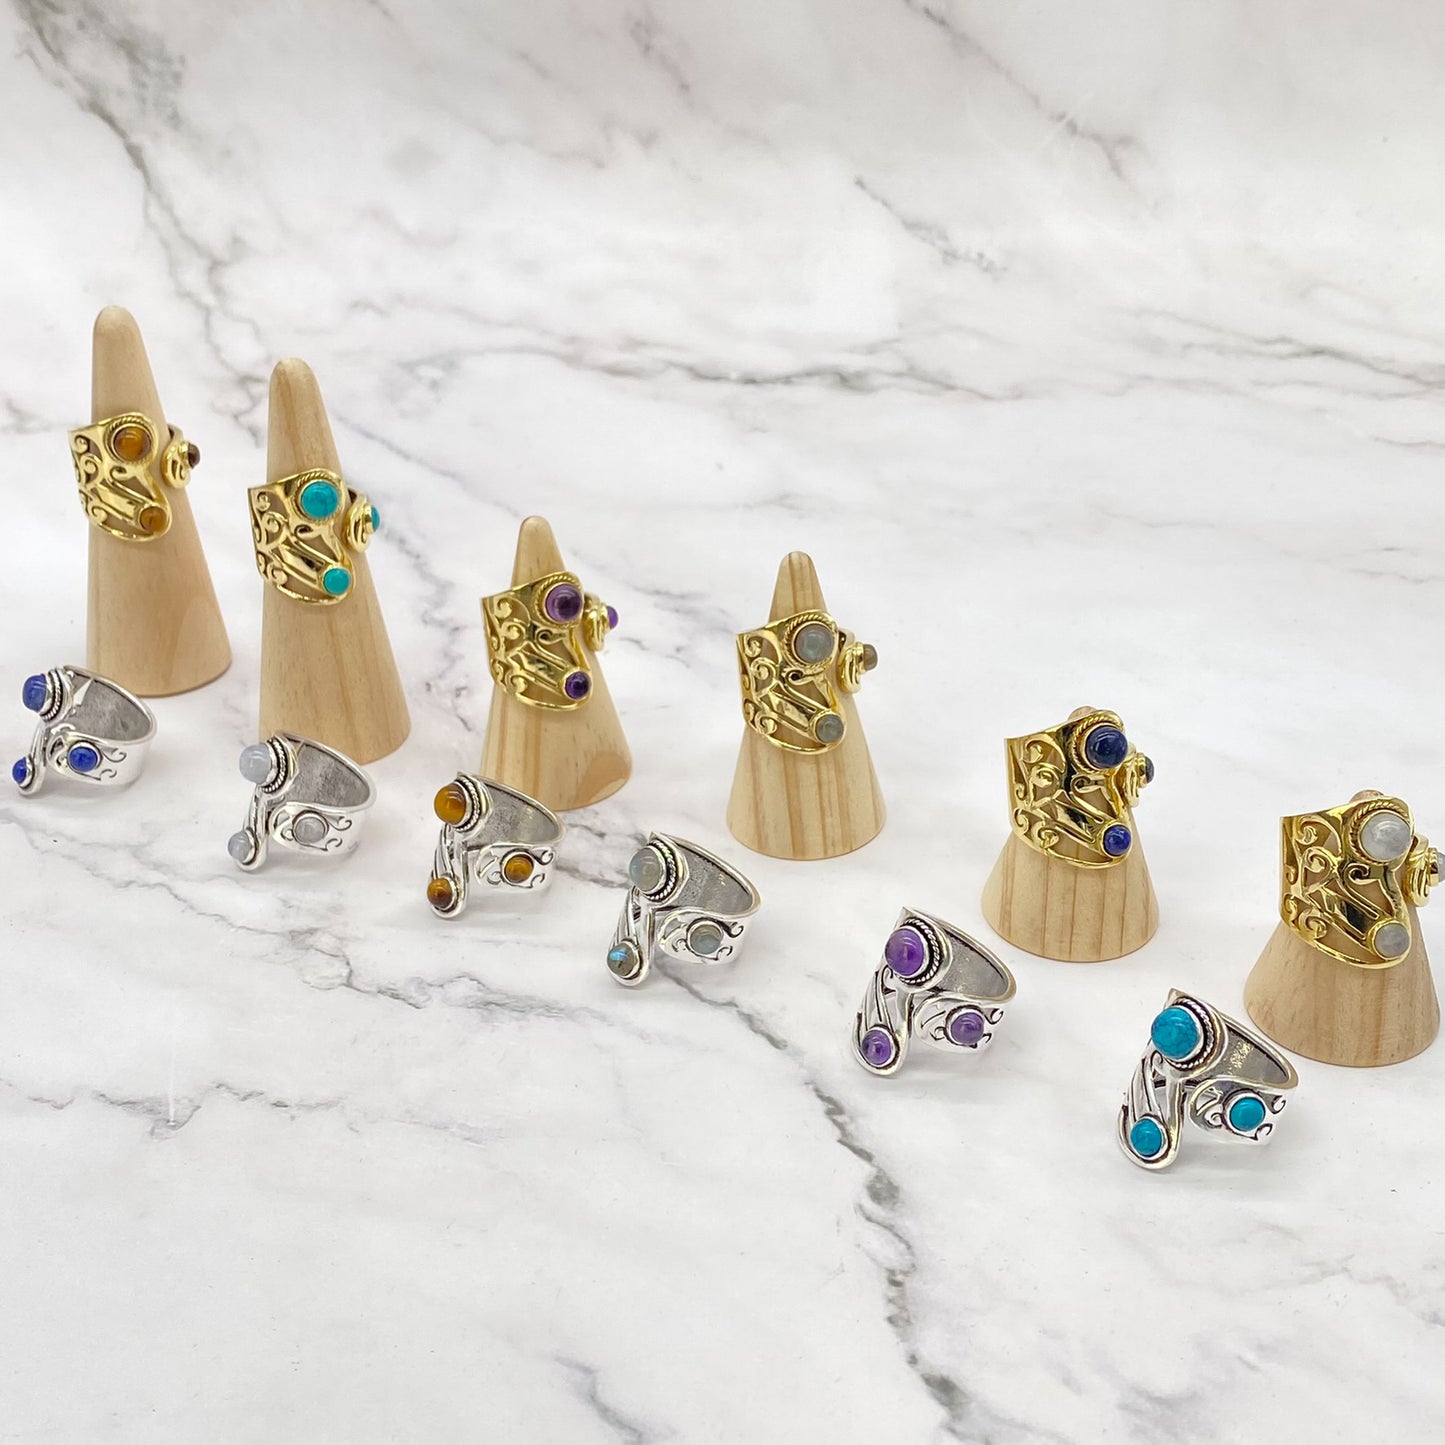 Handmade Chunky Adjustable Rings, Vintage Jewelry, Silver Rings, Gold Filled Crystal Rings, Non Tarnish Rings, Gypsy Jewelry, Gift For Her